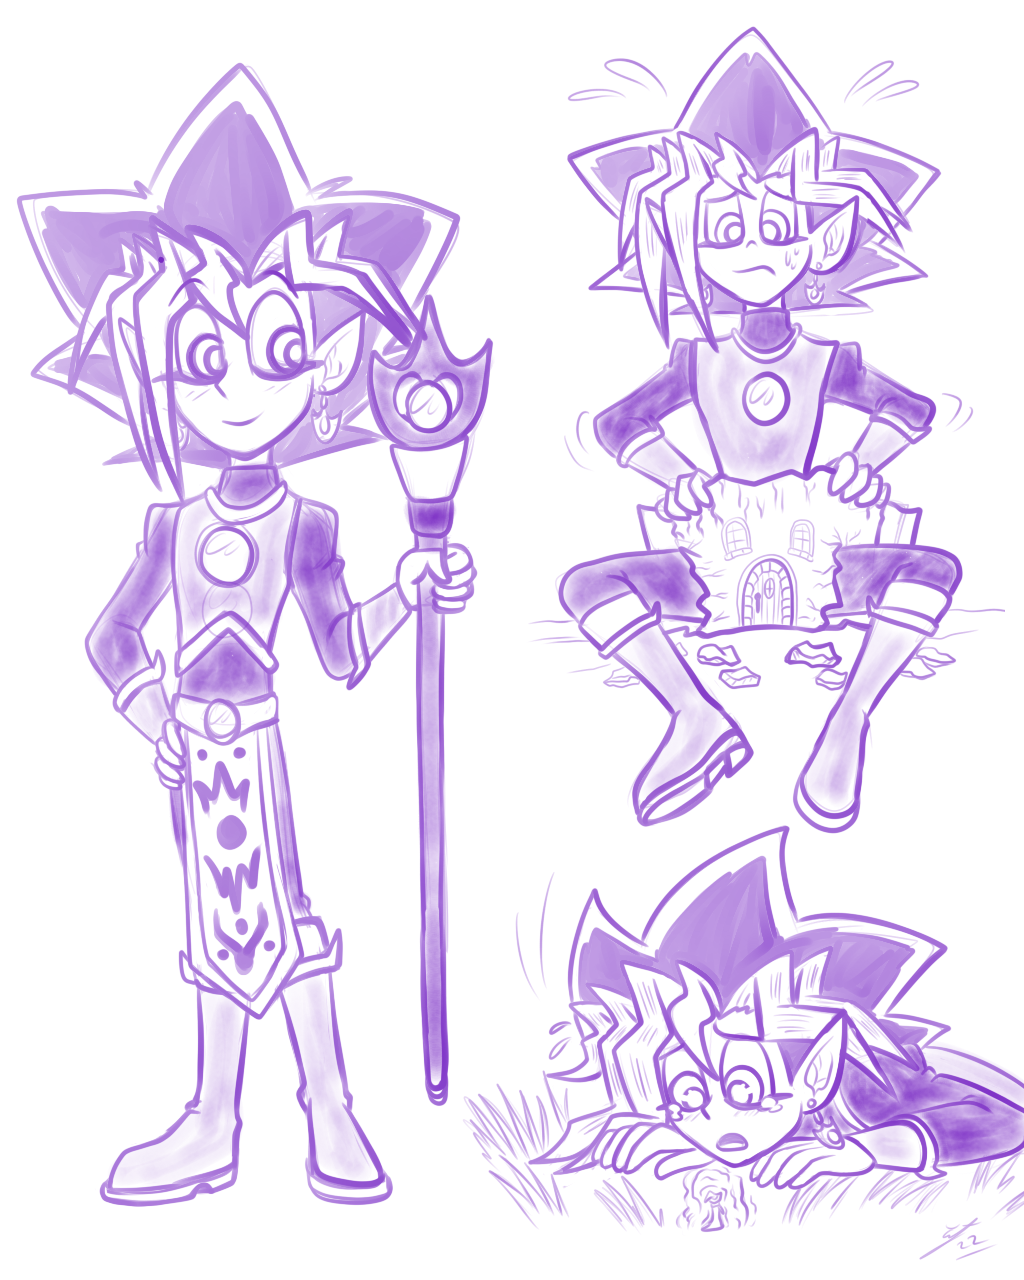 Yet another AU; Yugi as a powerful mage whose still trying to get a hold over his powers. Depending on his size that is 